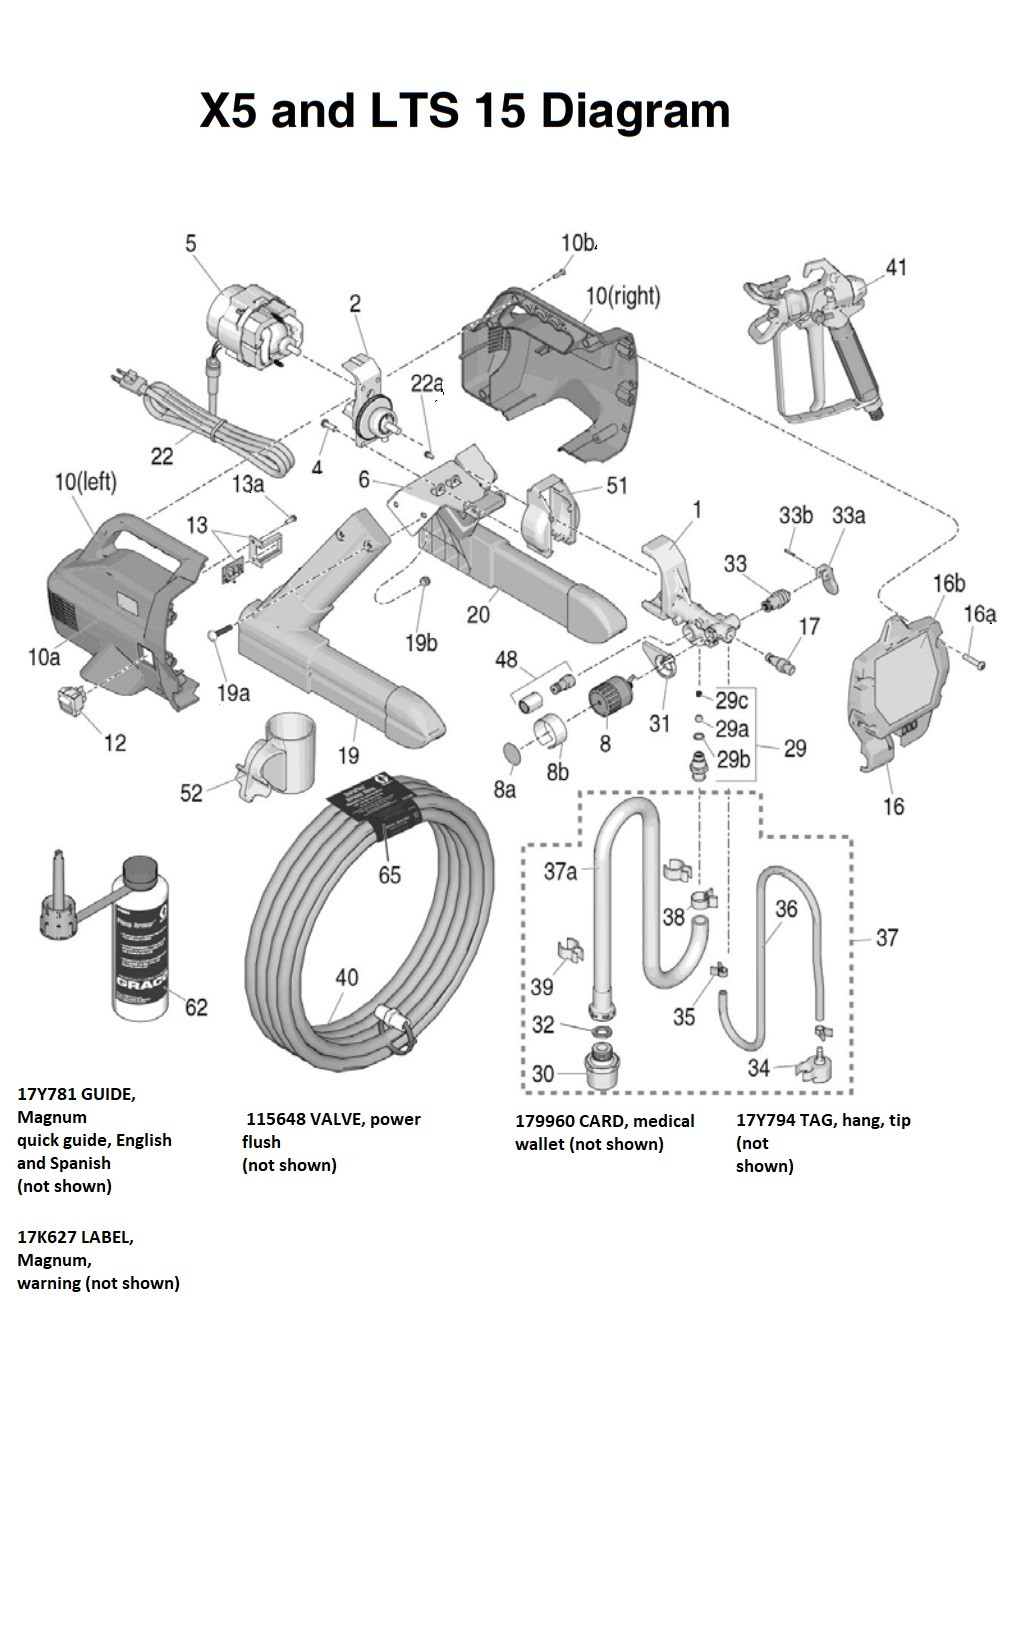 Graco X5 and LTS 15 Diagram and Parts List